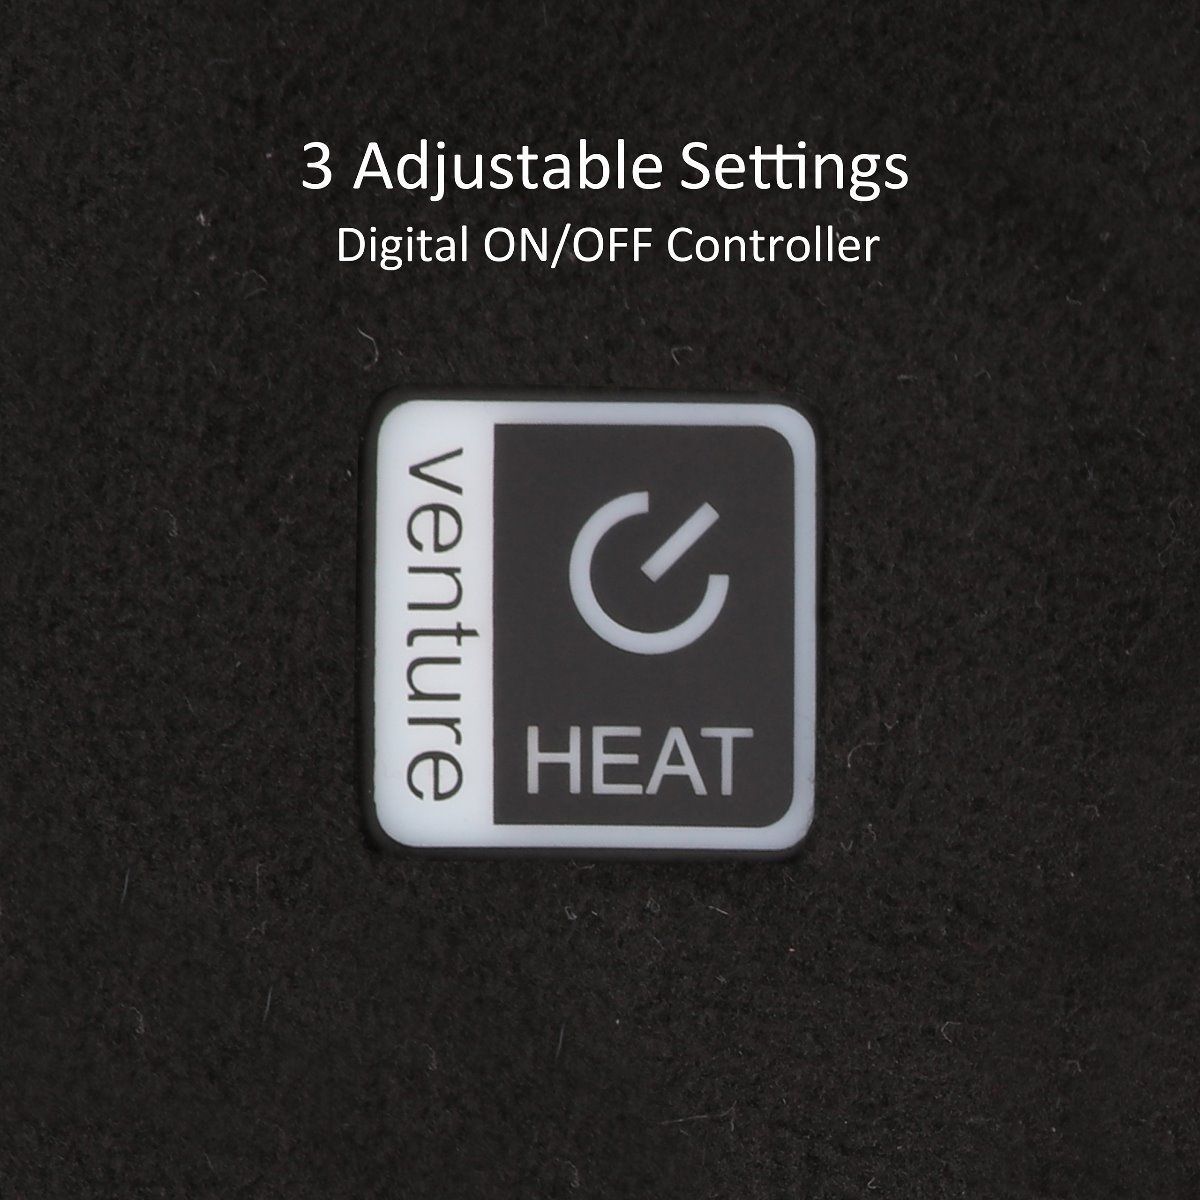 Venture Heat Deluxe Infrared Heated Therapeutic Pad 24" X 36"